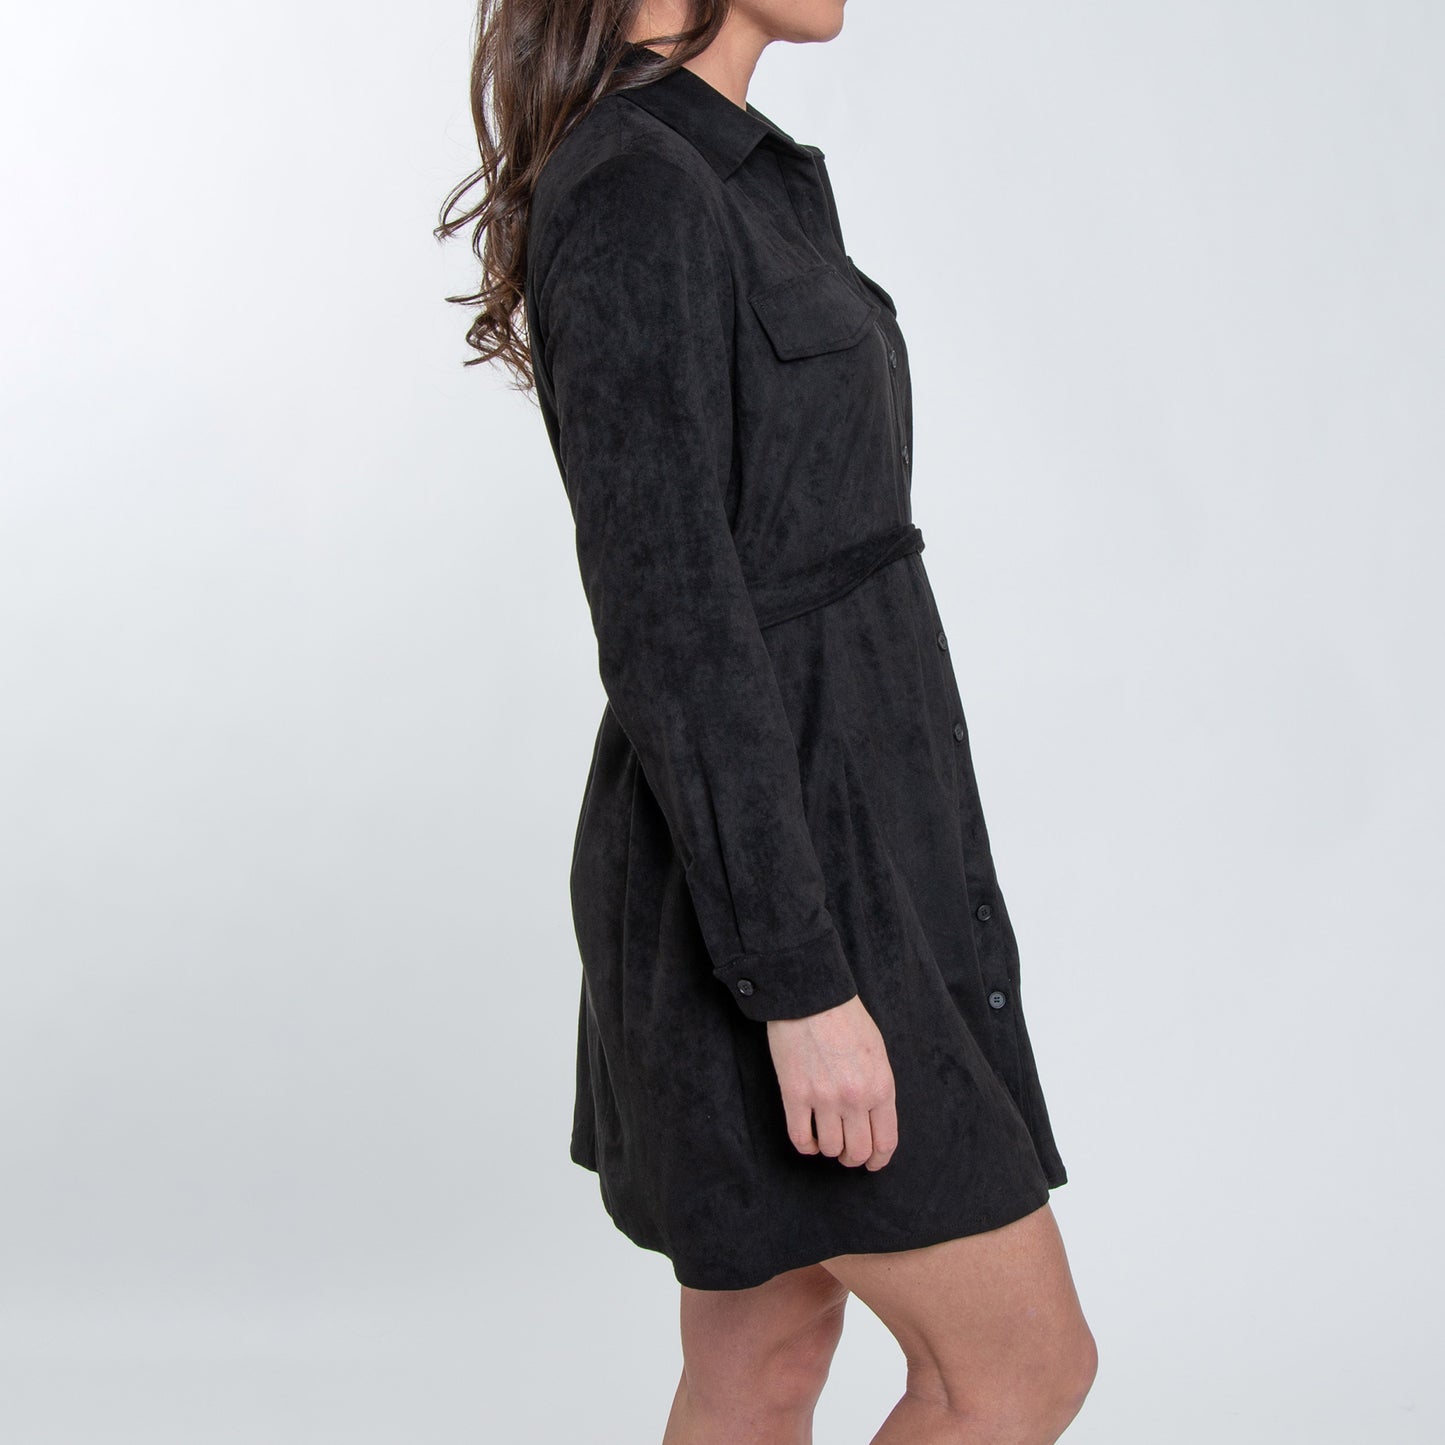 Shiloh Stretchy Suede Long Sleeve Shirt Dress